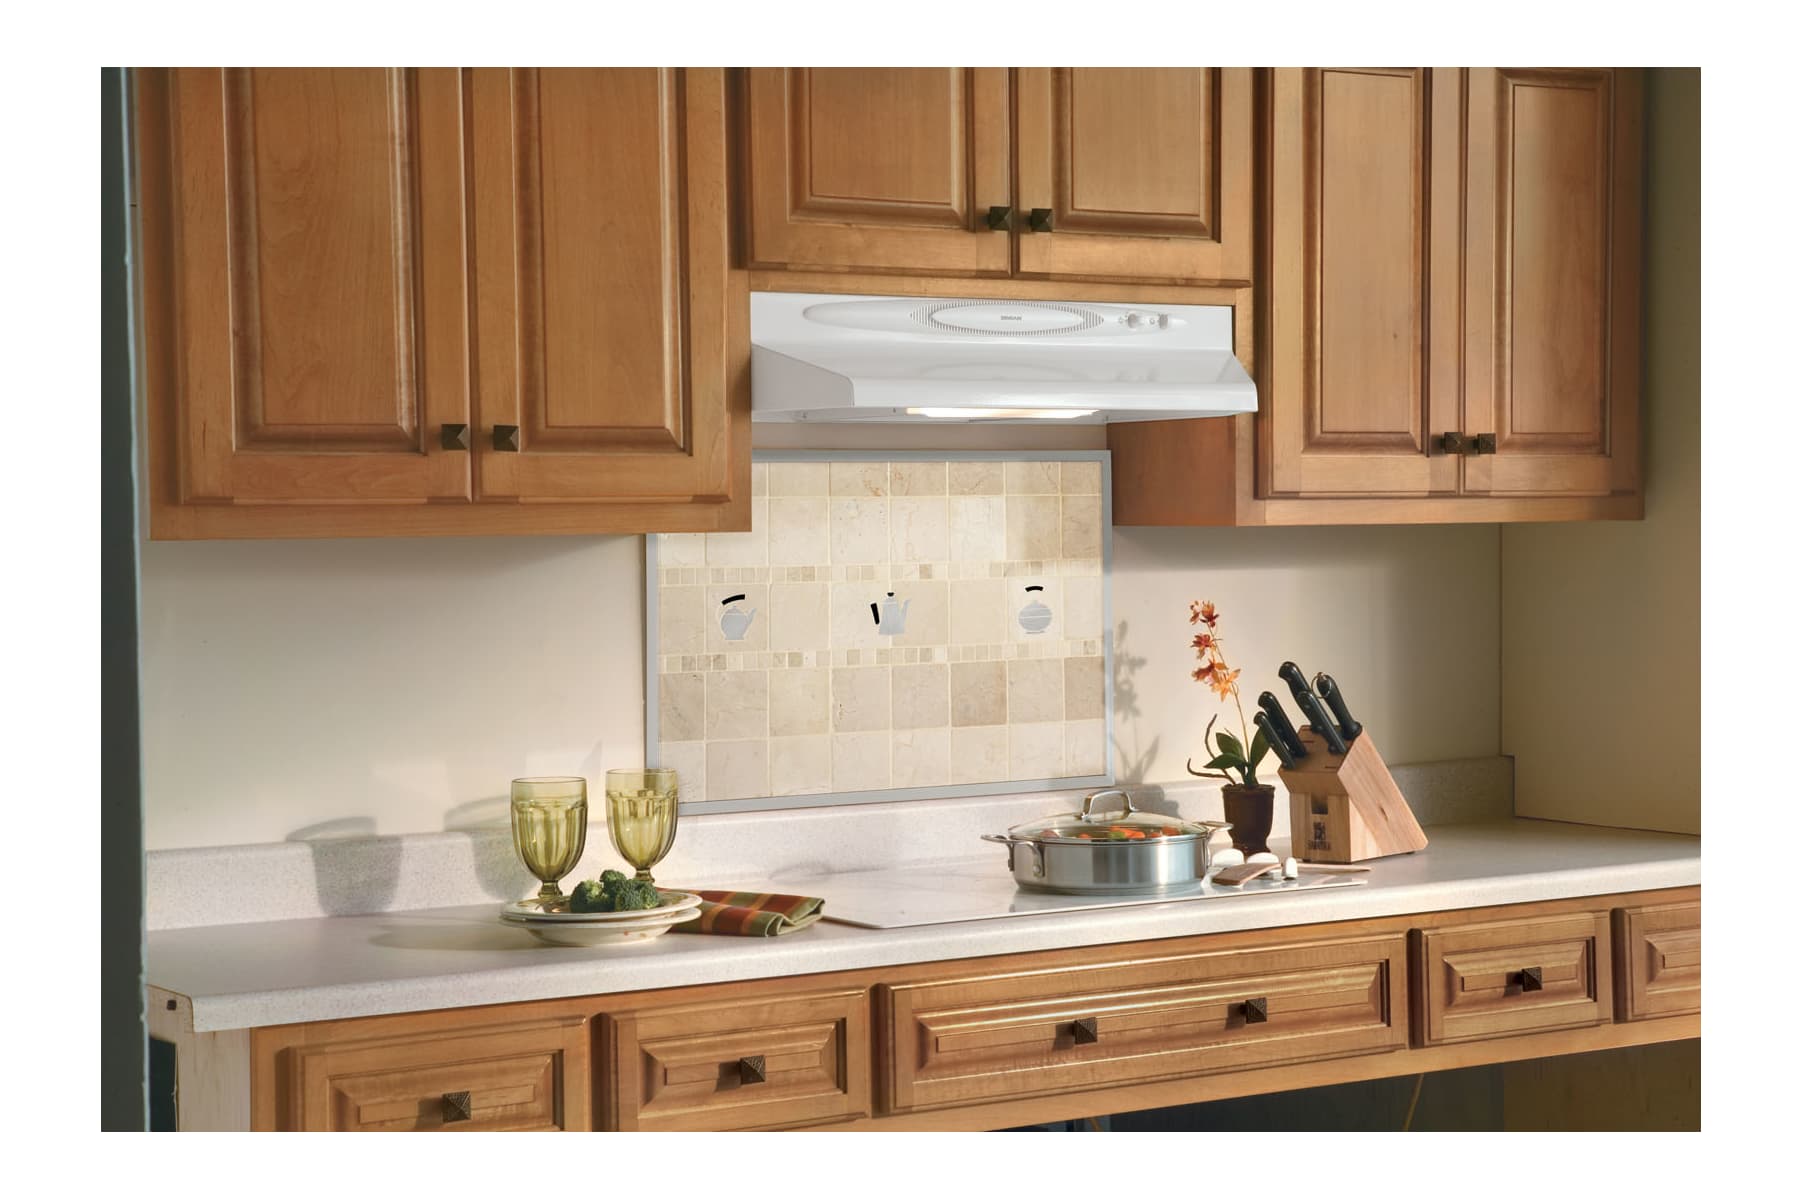 Broan QT230SS 30 Inch Under Cabinet Range Hood with 200 CFM Internal Blower  and Quiet Operation: Stainless Steel